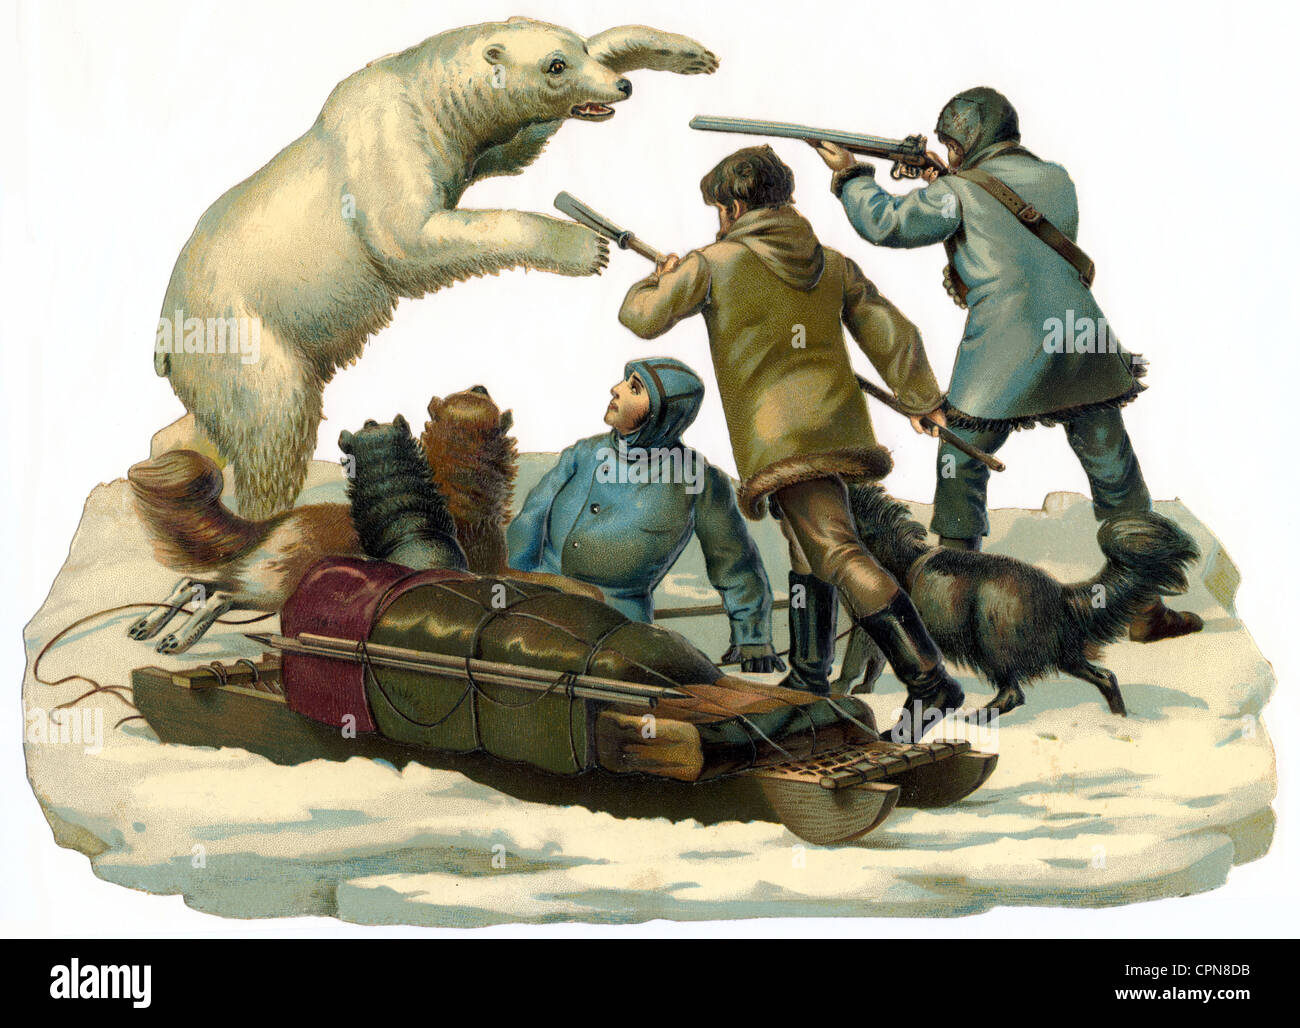 hunt, bearhunting, polar bear attacking people, Germany, circa 1895, Additional-Rights-Clearences-Not Available Stock Photo